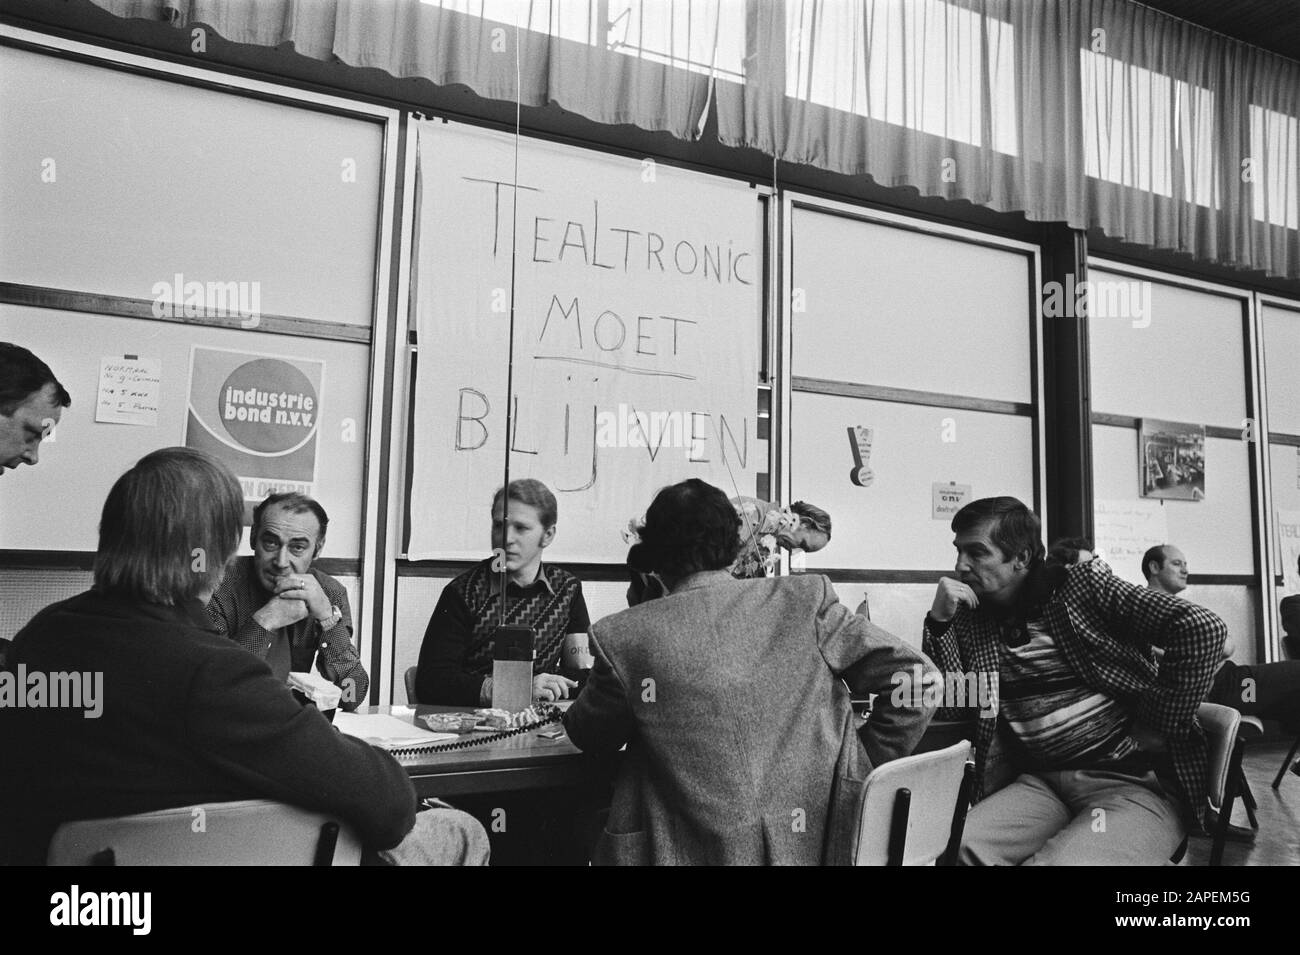 Occupation Tealtronic; action center Date: January 10, 1977 Keywords: occupancy Stock Photo